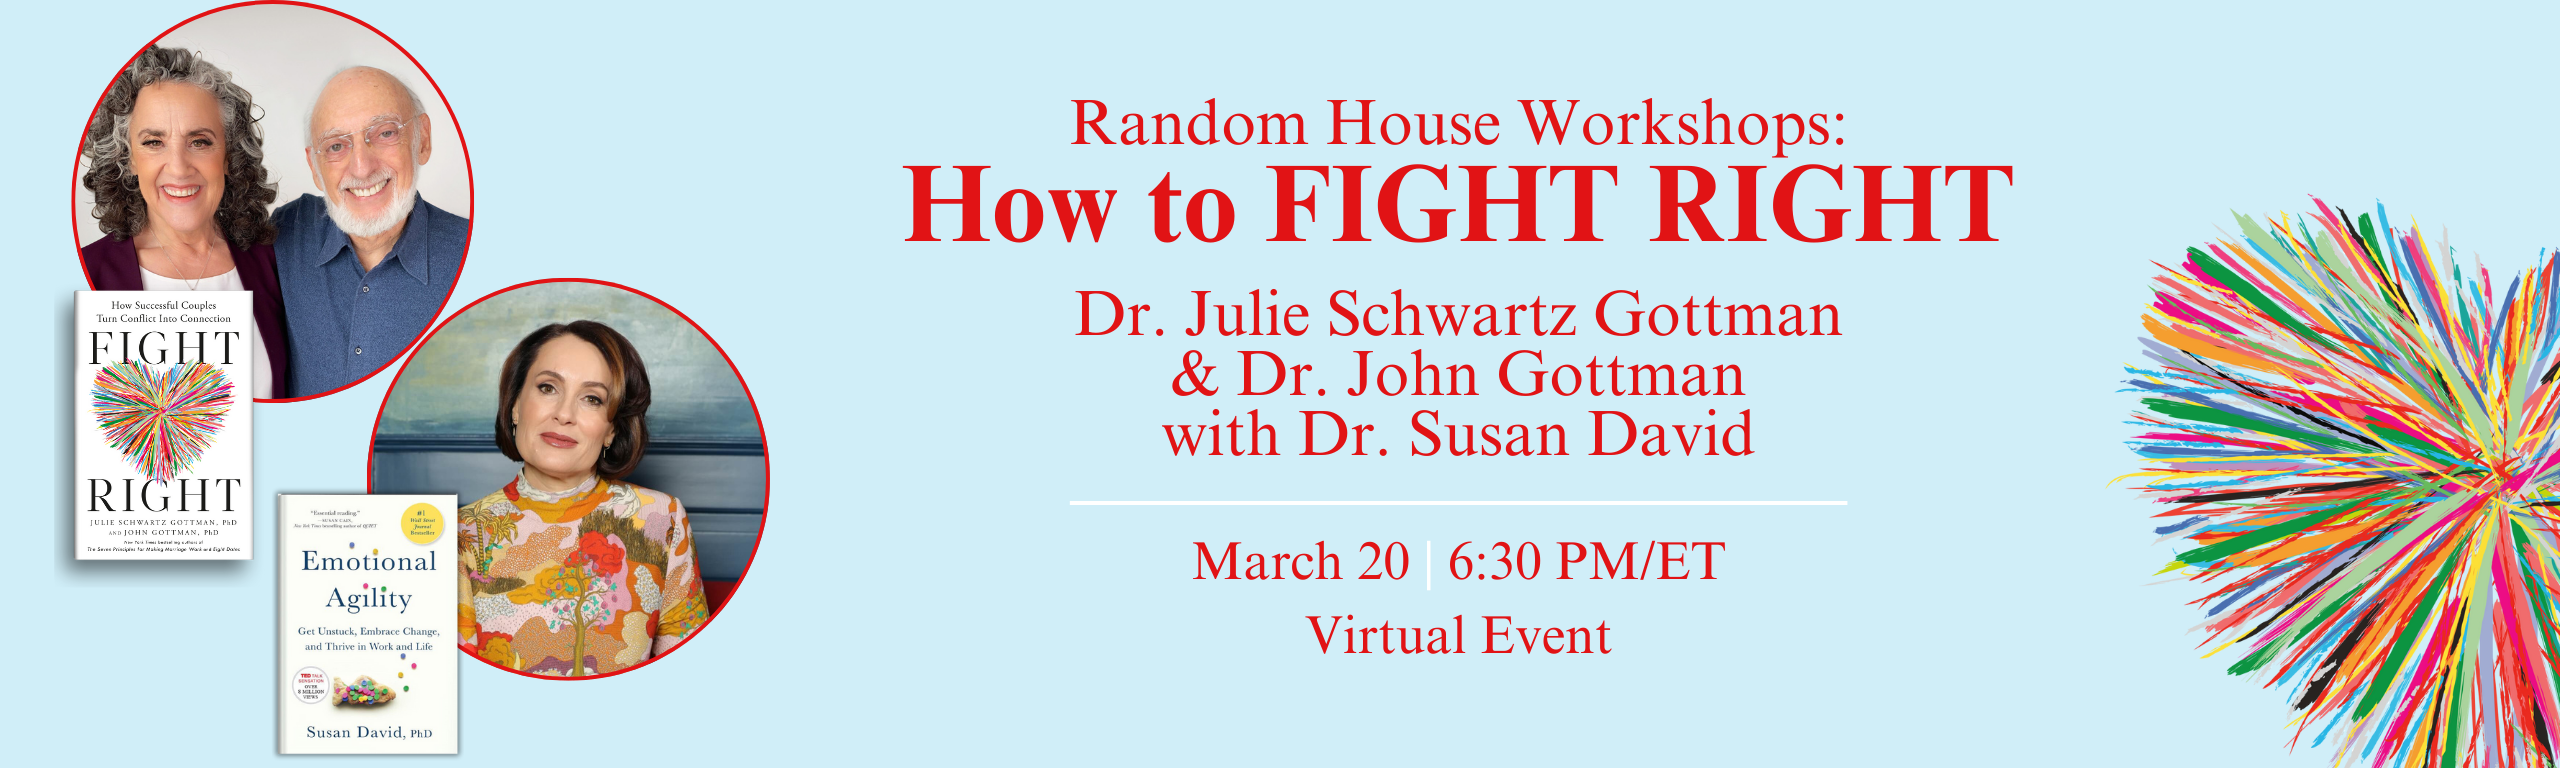 Random House Workshops: How to FIGHT RIGHT